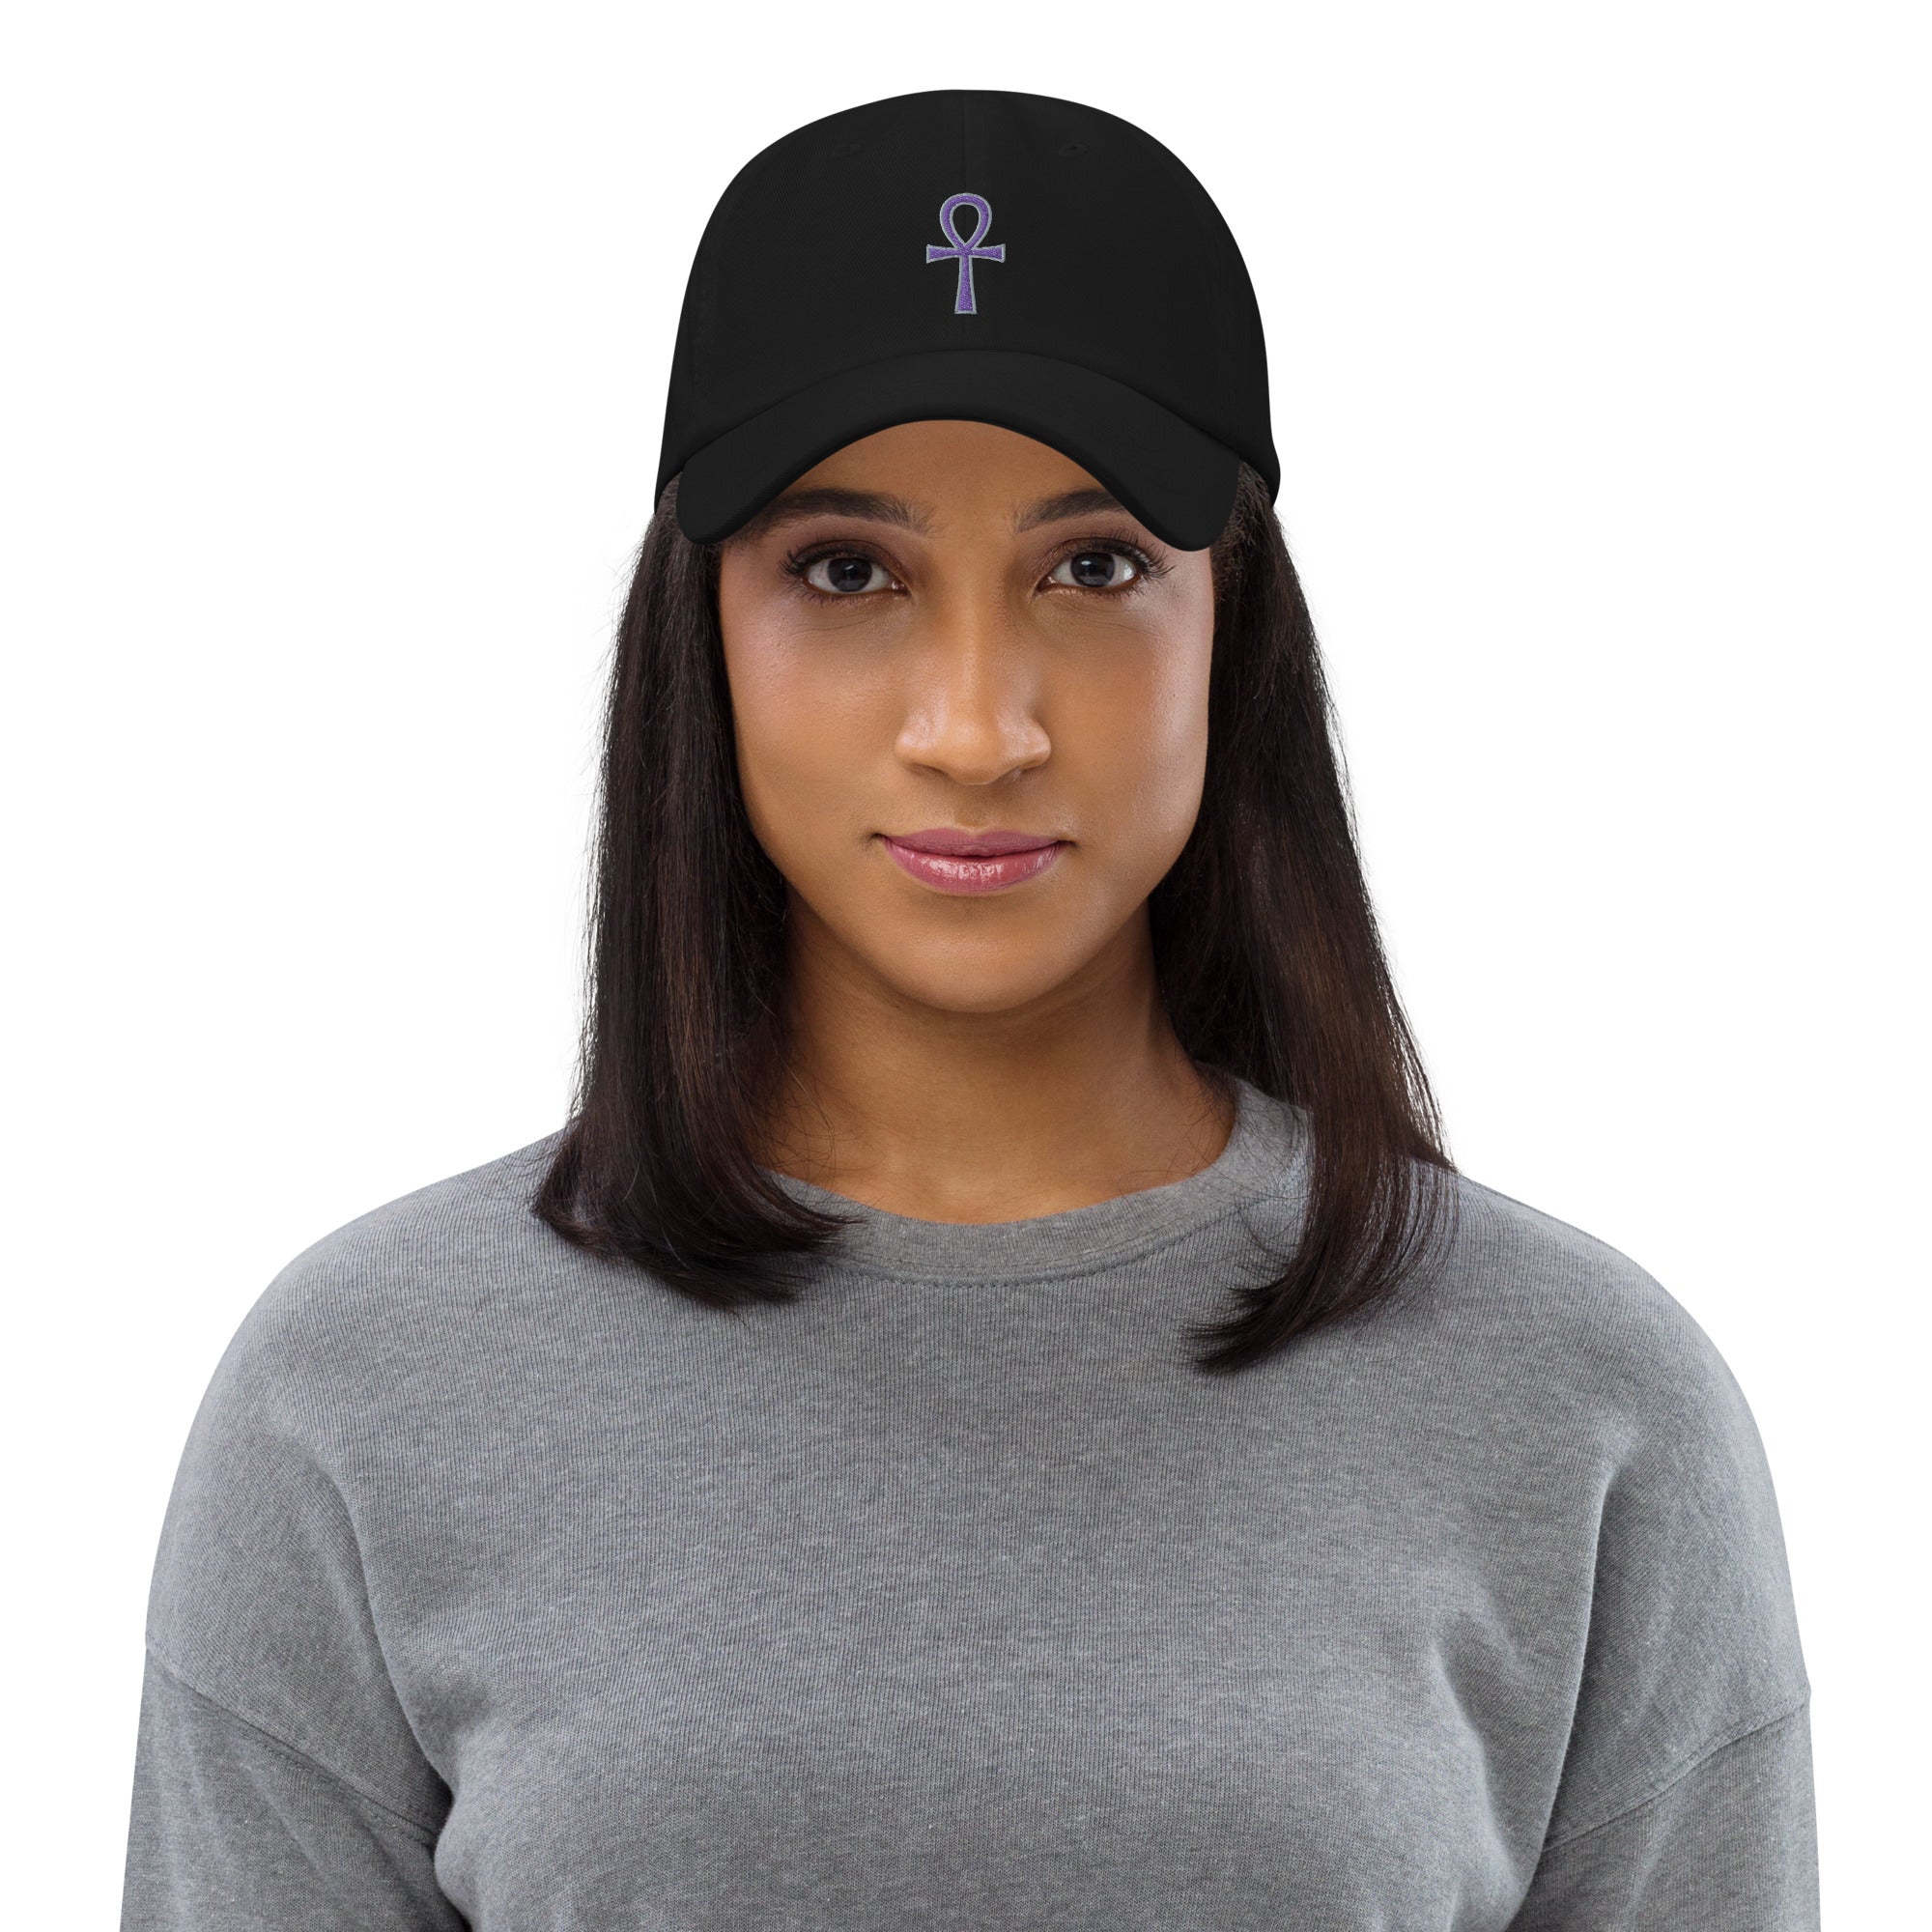 The Key of Life Ankh Ancient Egyptian Culture Embroidered Baseball Cap Dad hat Purple Thread - Edge of Life Designs